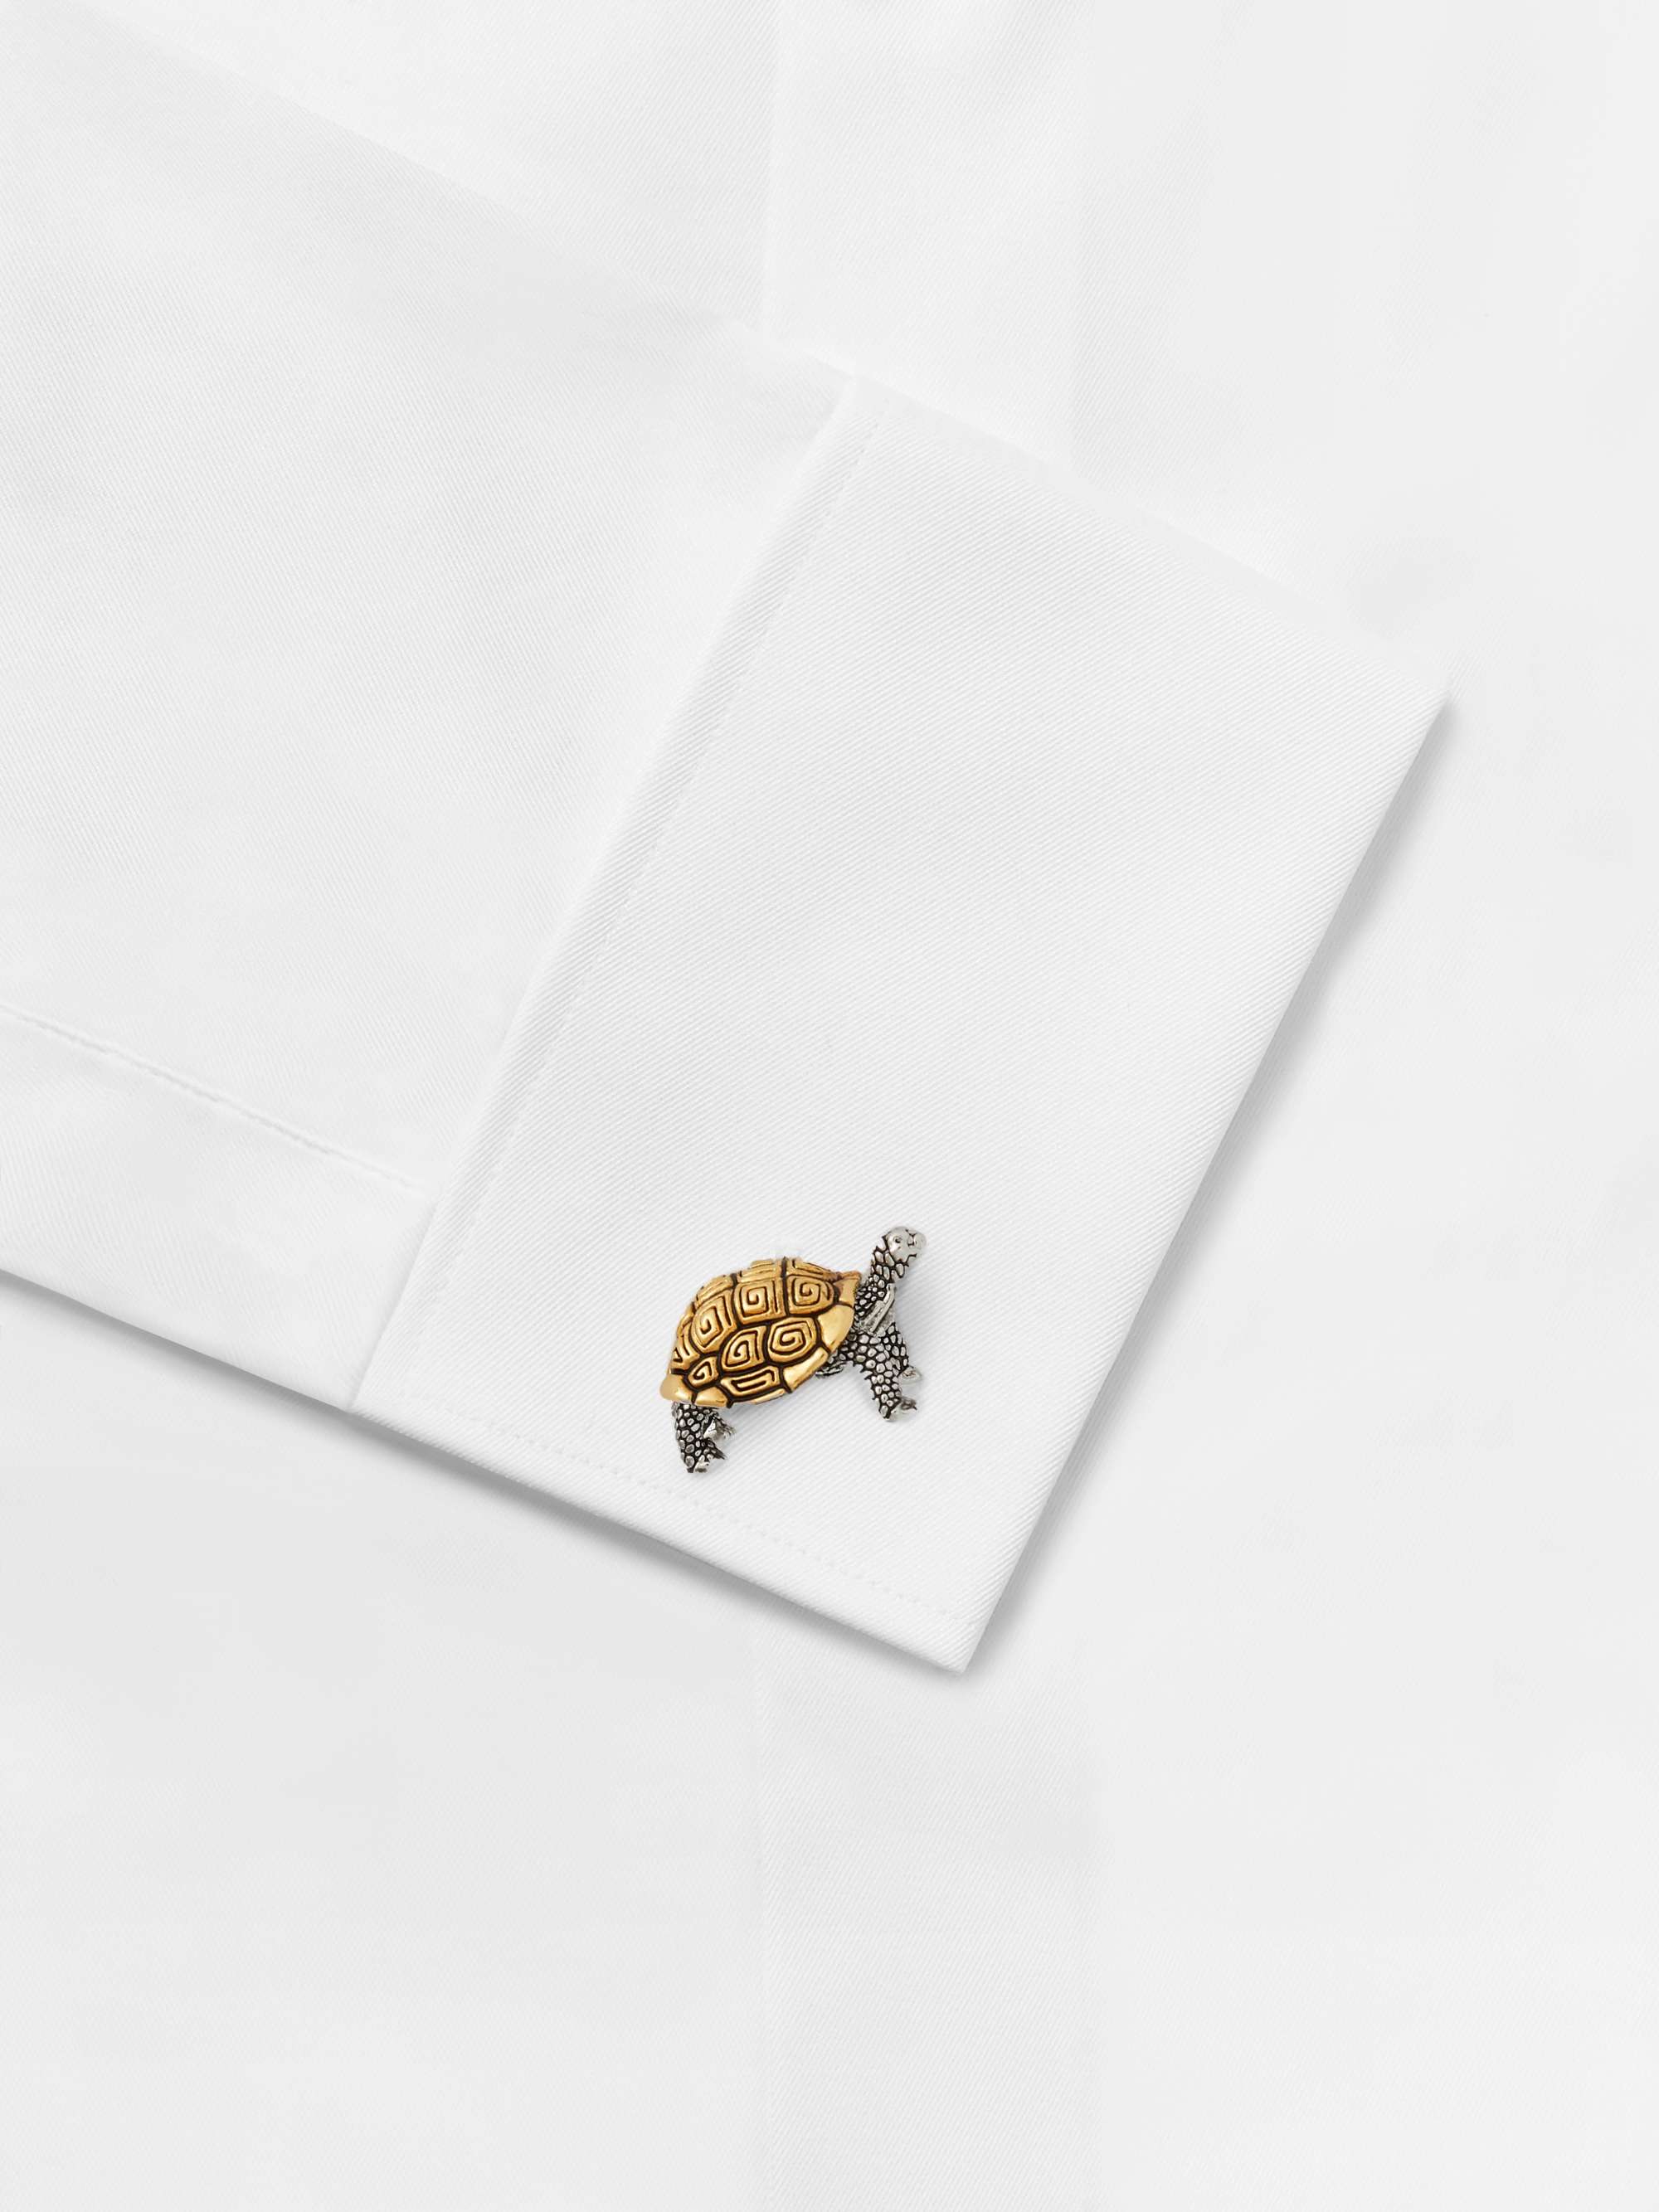 PAUL SMITH Gold- and Silver-Tone Cufflinks